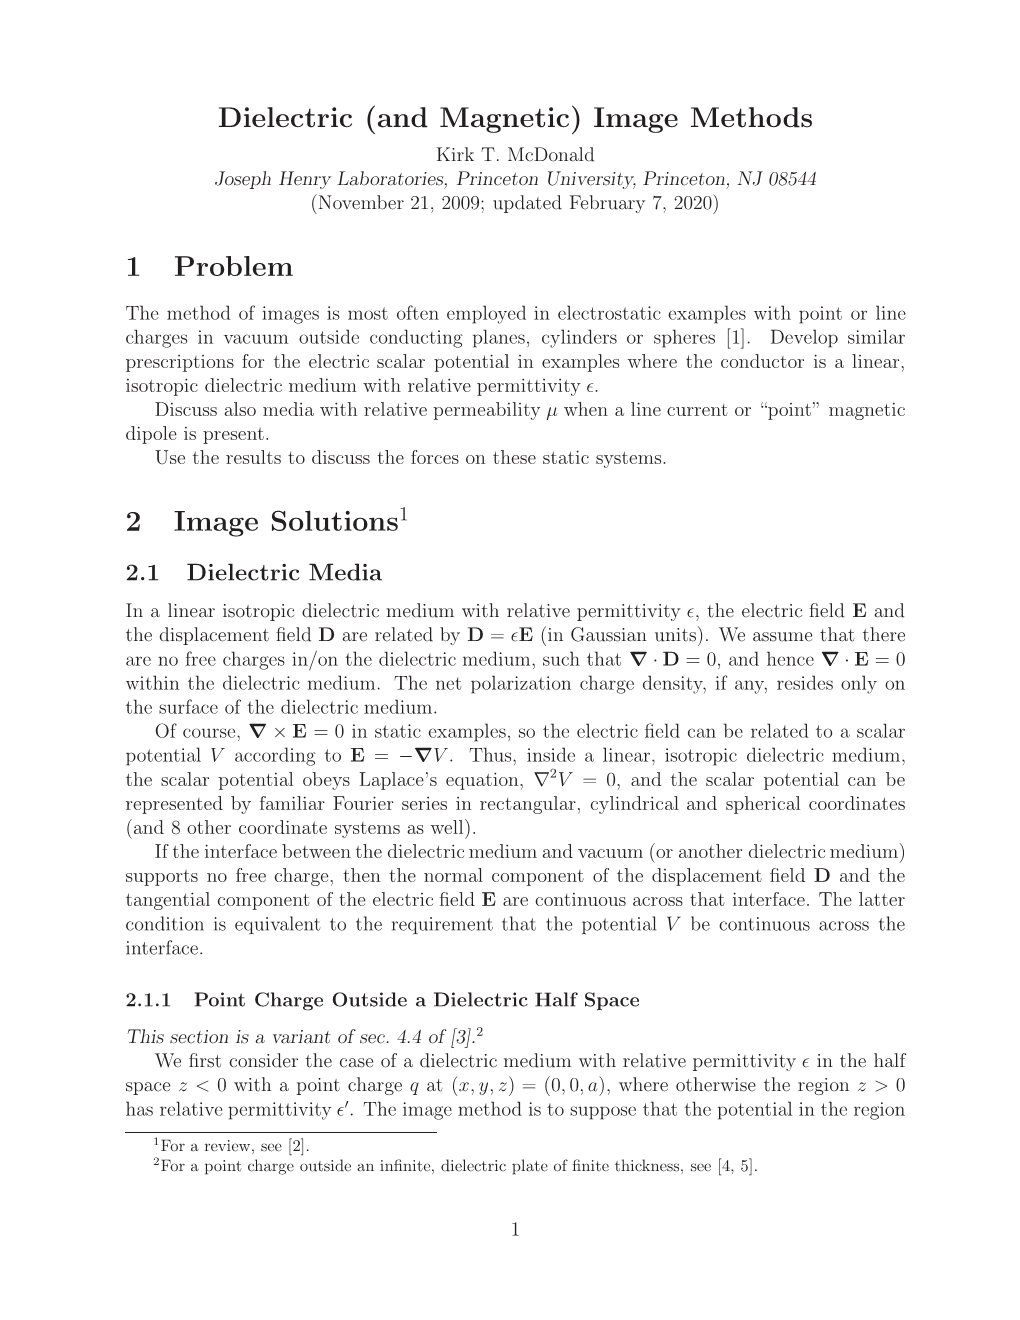 Dielectric (And Magnetic) Image Methods Kirk T